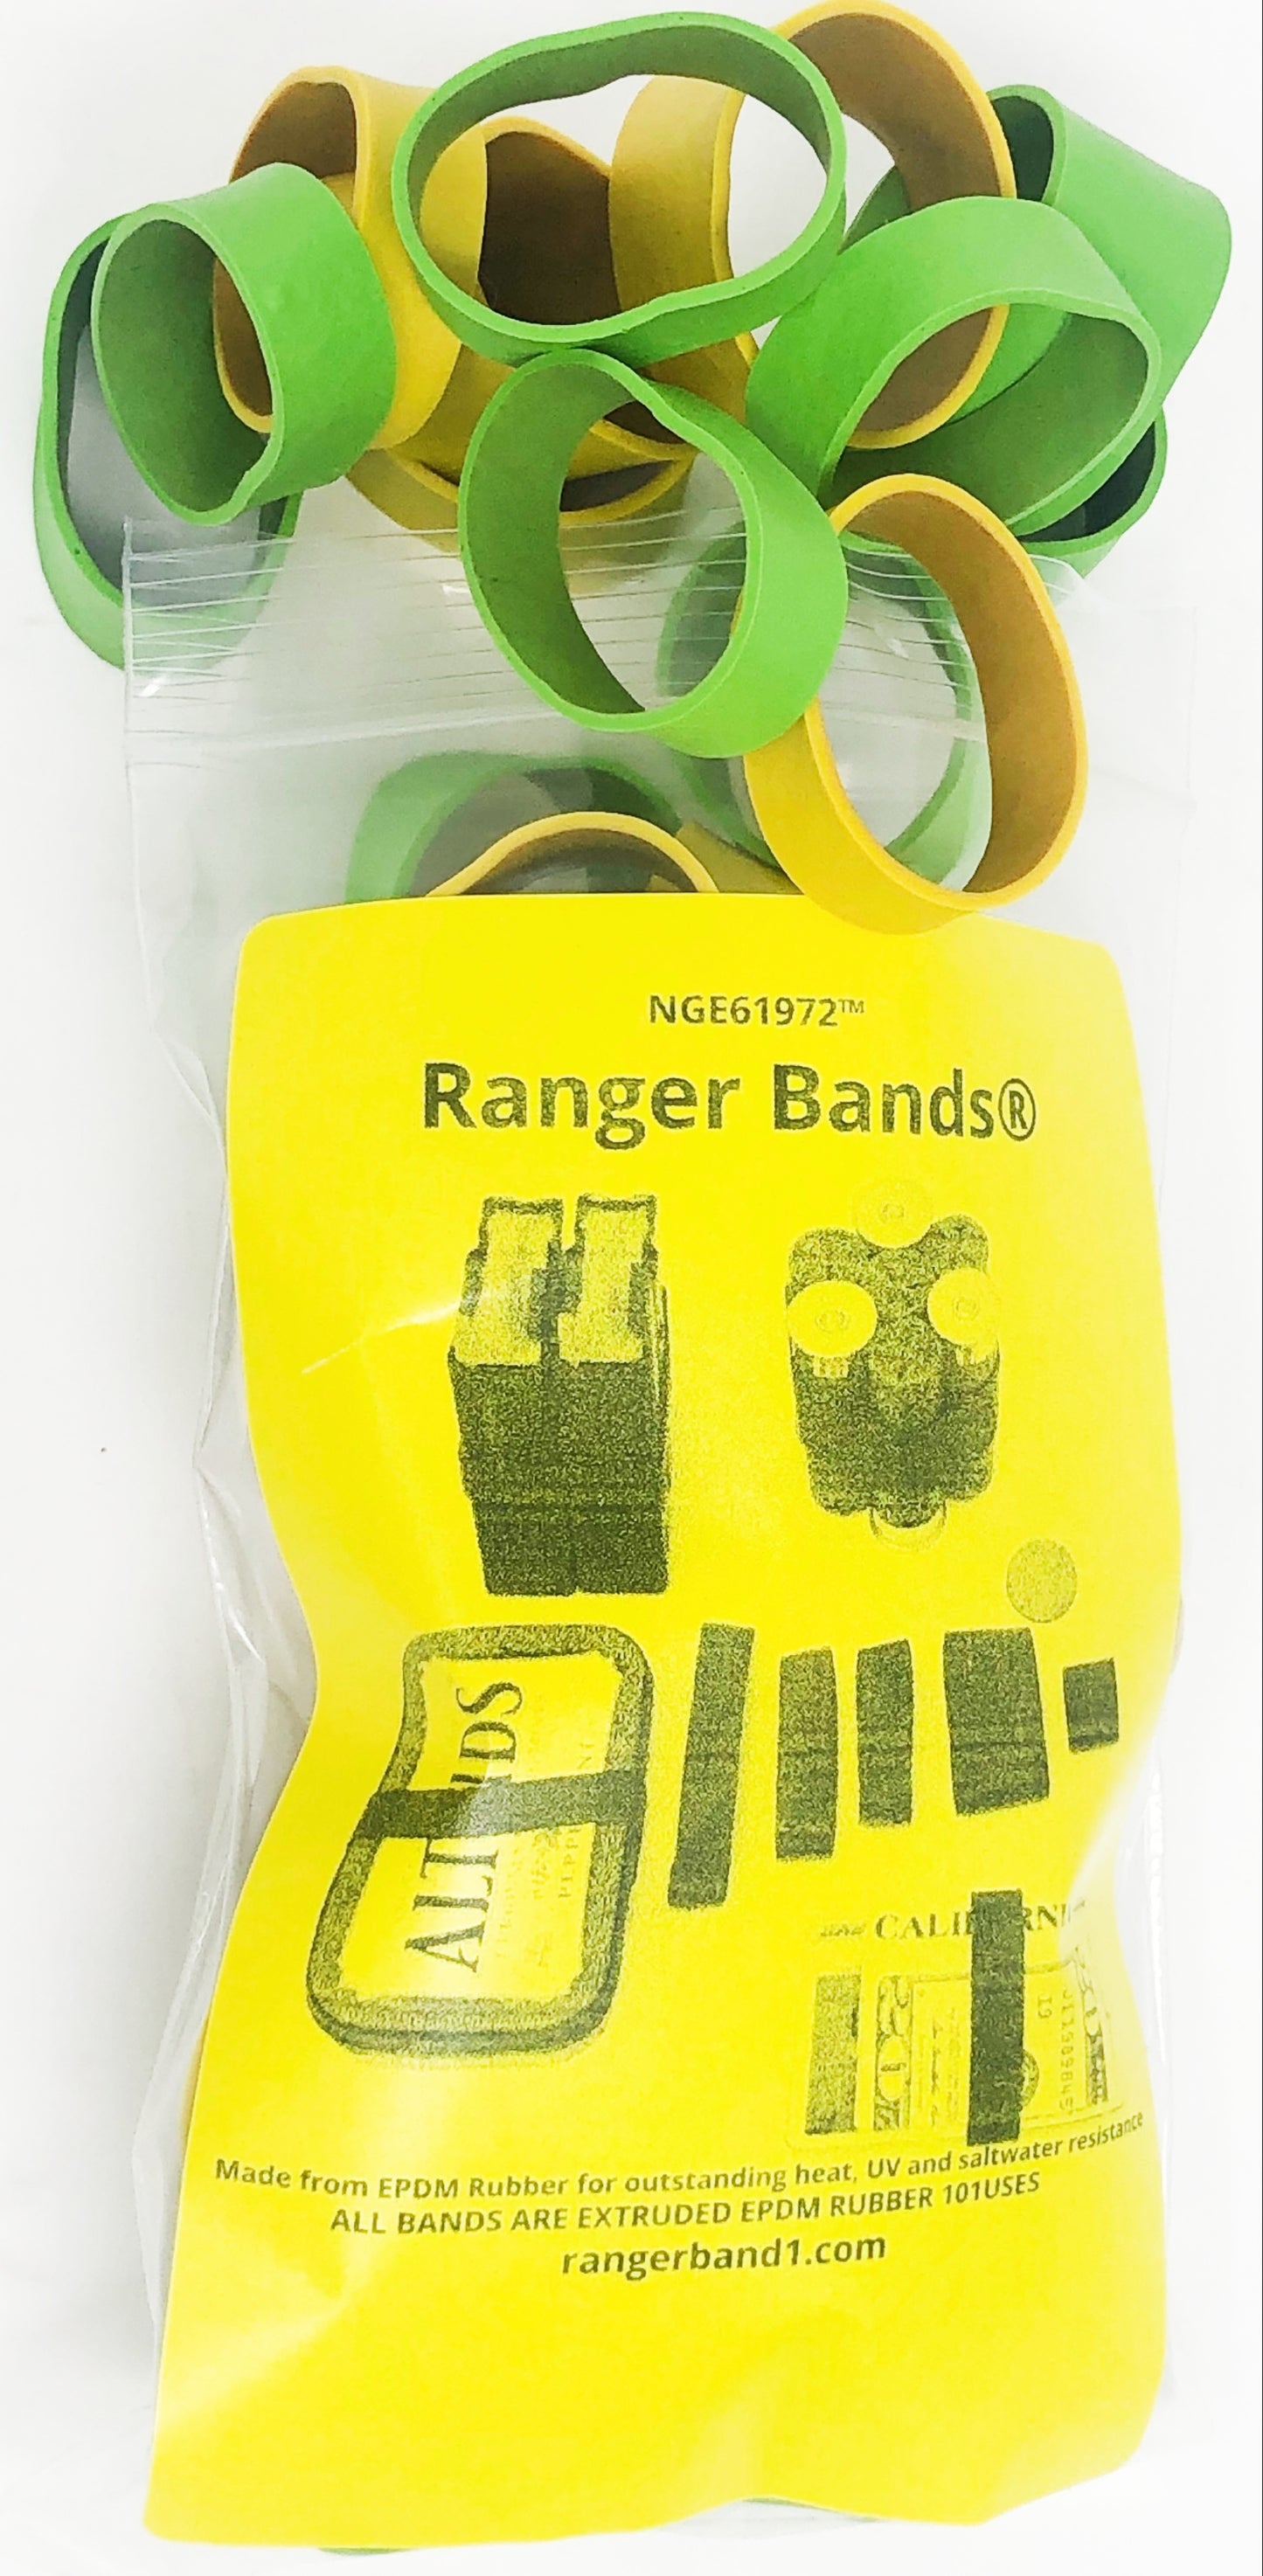 Ranger Bands® Mixed 40 Count Extra Stretch Safety colors Made from EPDM Rubber for Survival, Emergency Tinder and Strapping Gear Made in the USA